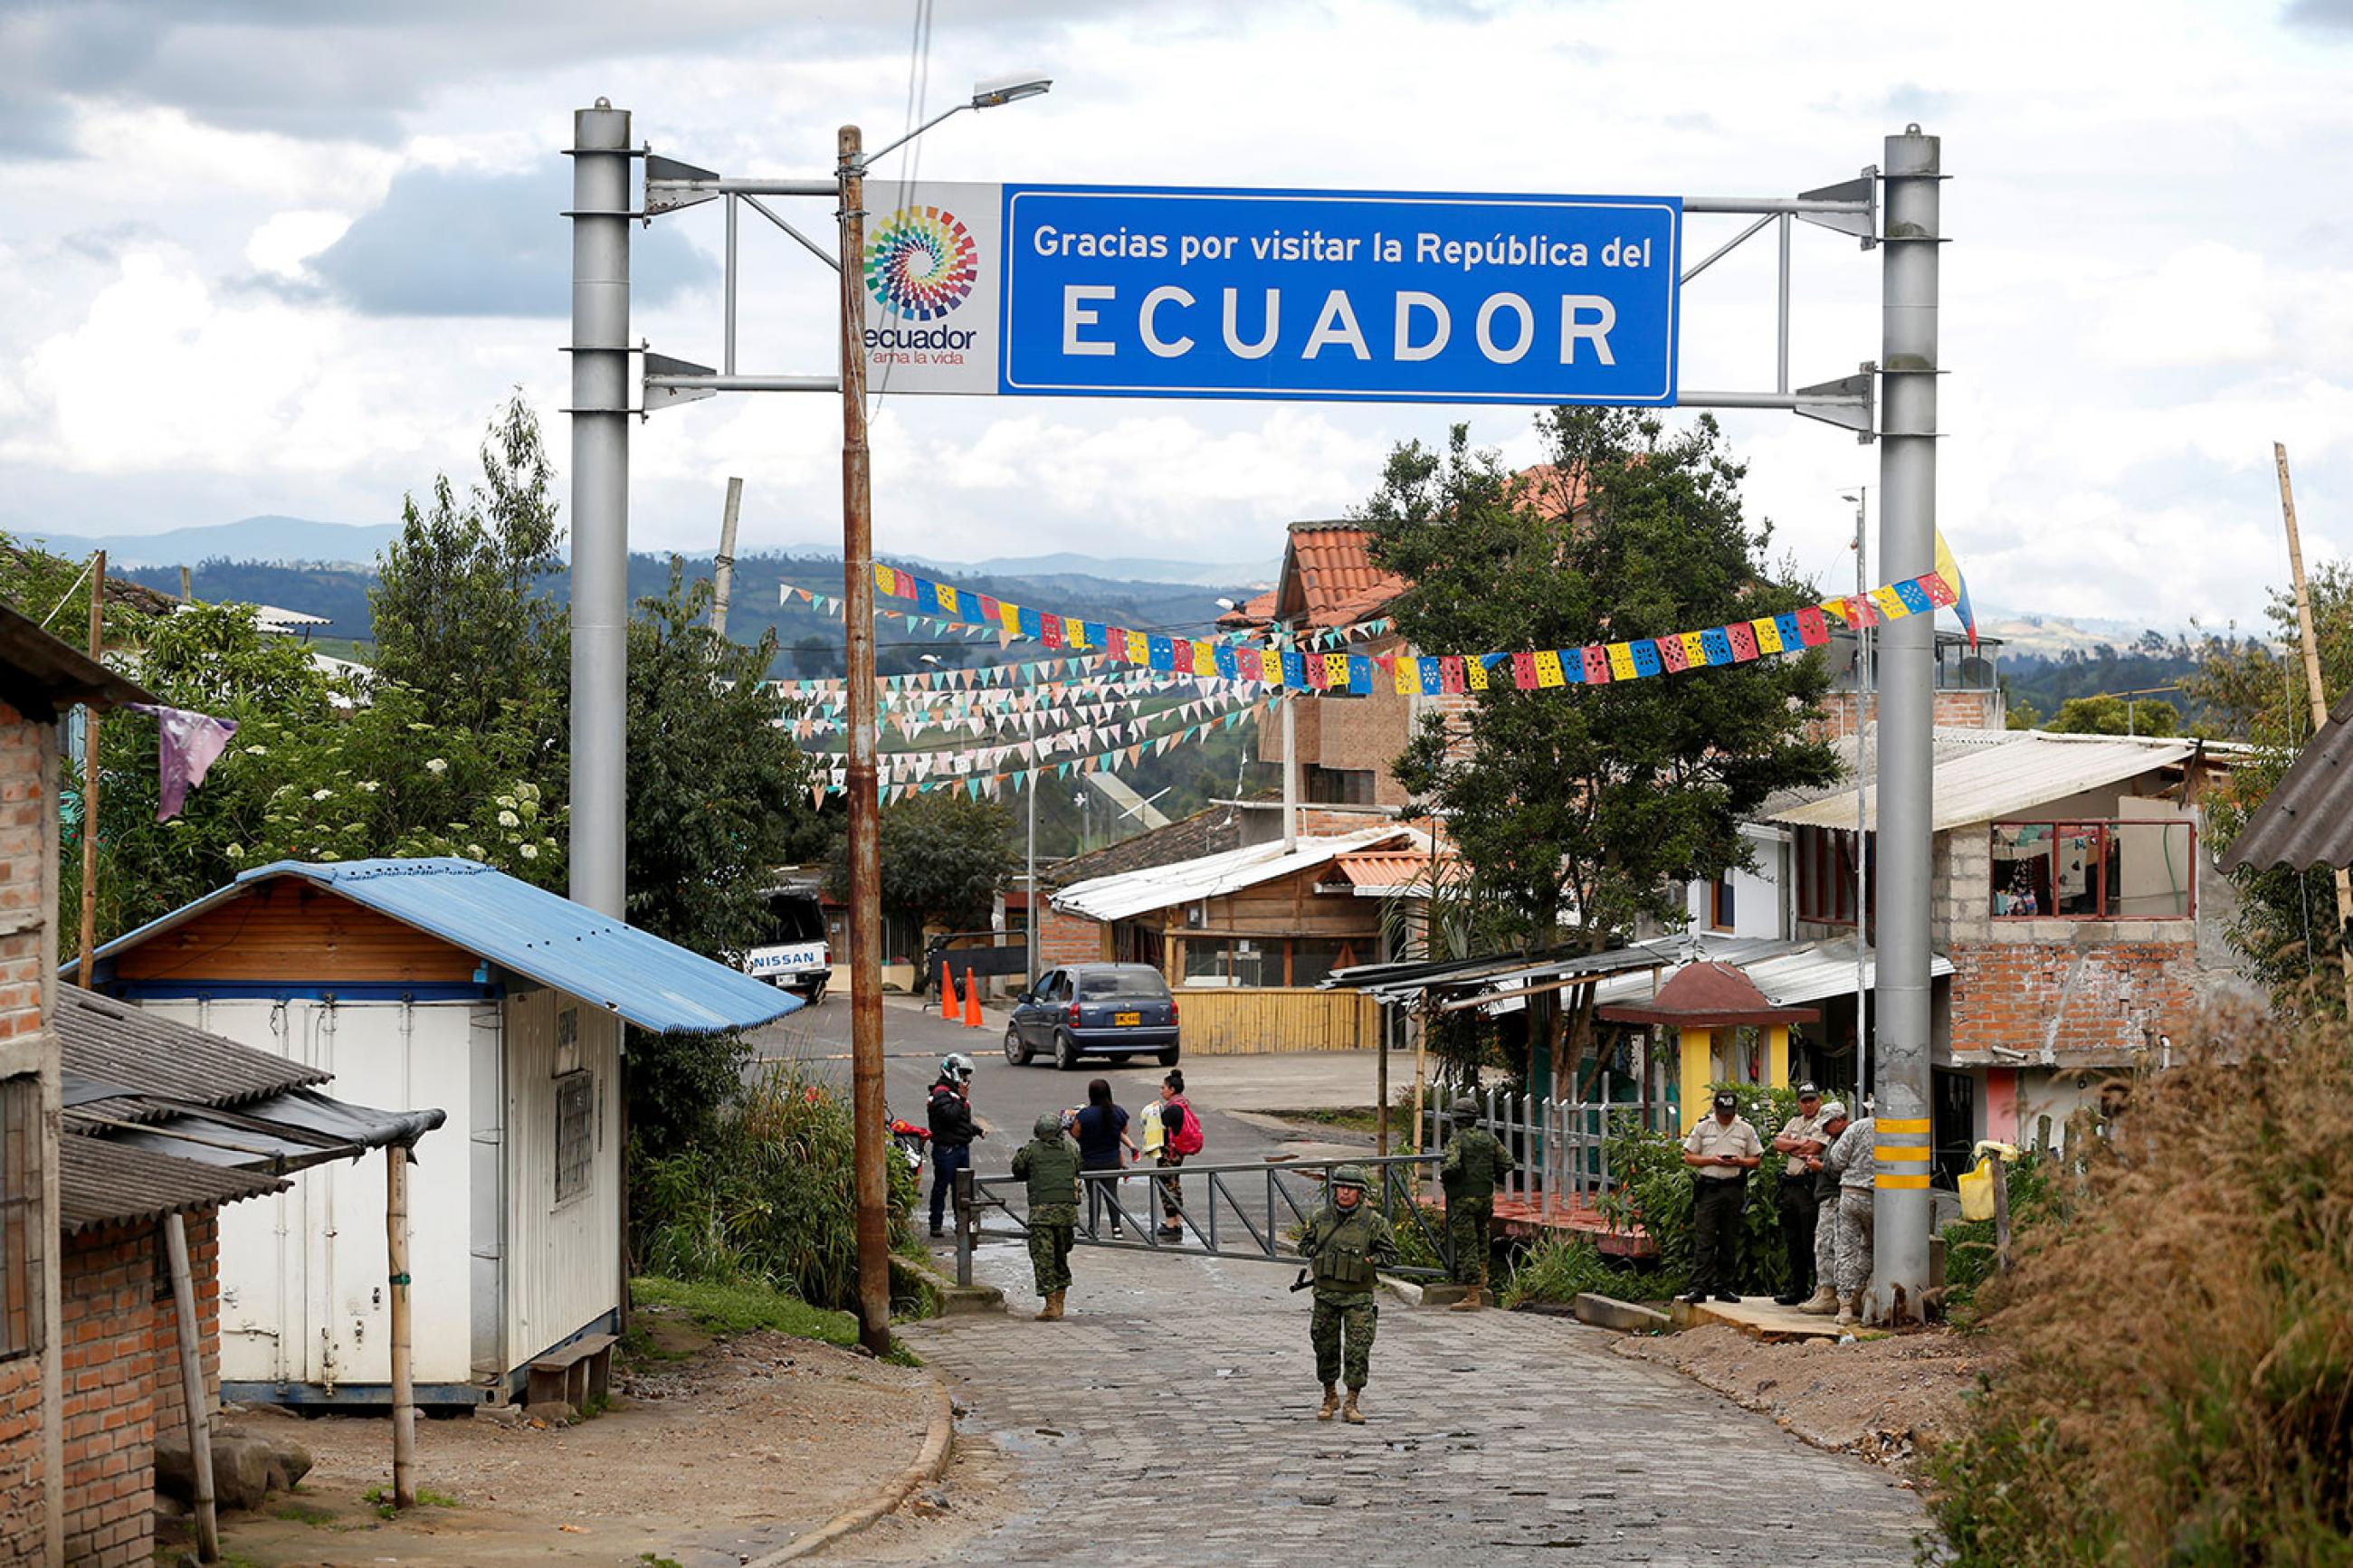 Soldiers guard the Ecuadoran side of a border with Colombia in Tufino, Ecuador on March 15, 2020, after country leaders announced the closure of its borders to all foreign travelers due to COVID-19. The photo shows a simple border crossing through a small town with a big sign reading "Ecuador" above the street. The crossing is closed with metal barricades, and a soldier stands out front. REUTERS/Daniel Tapia 